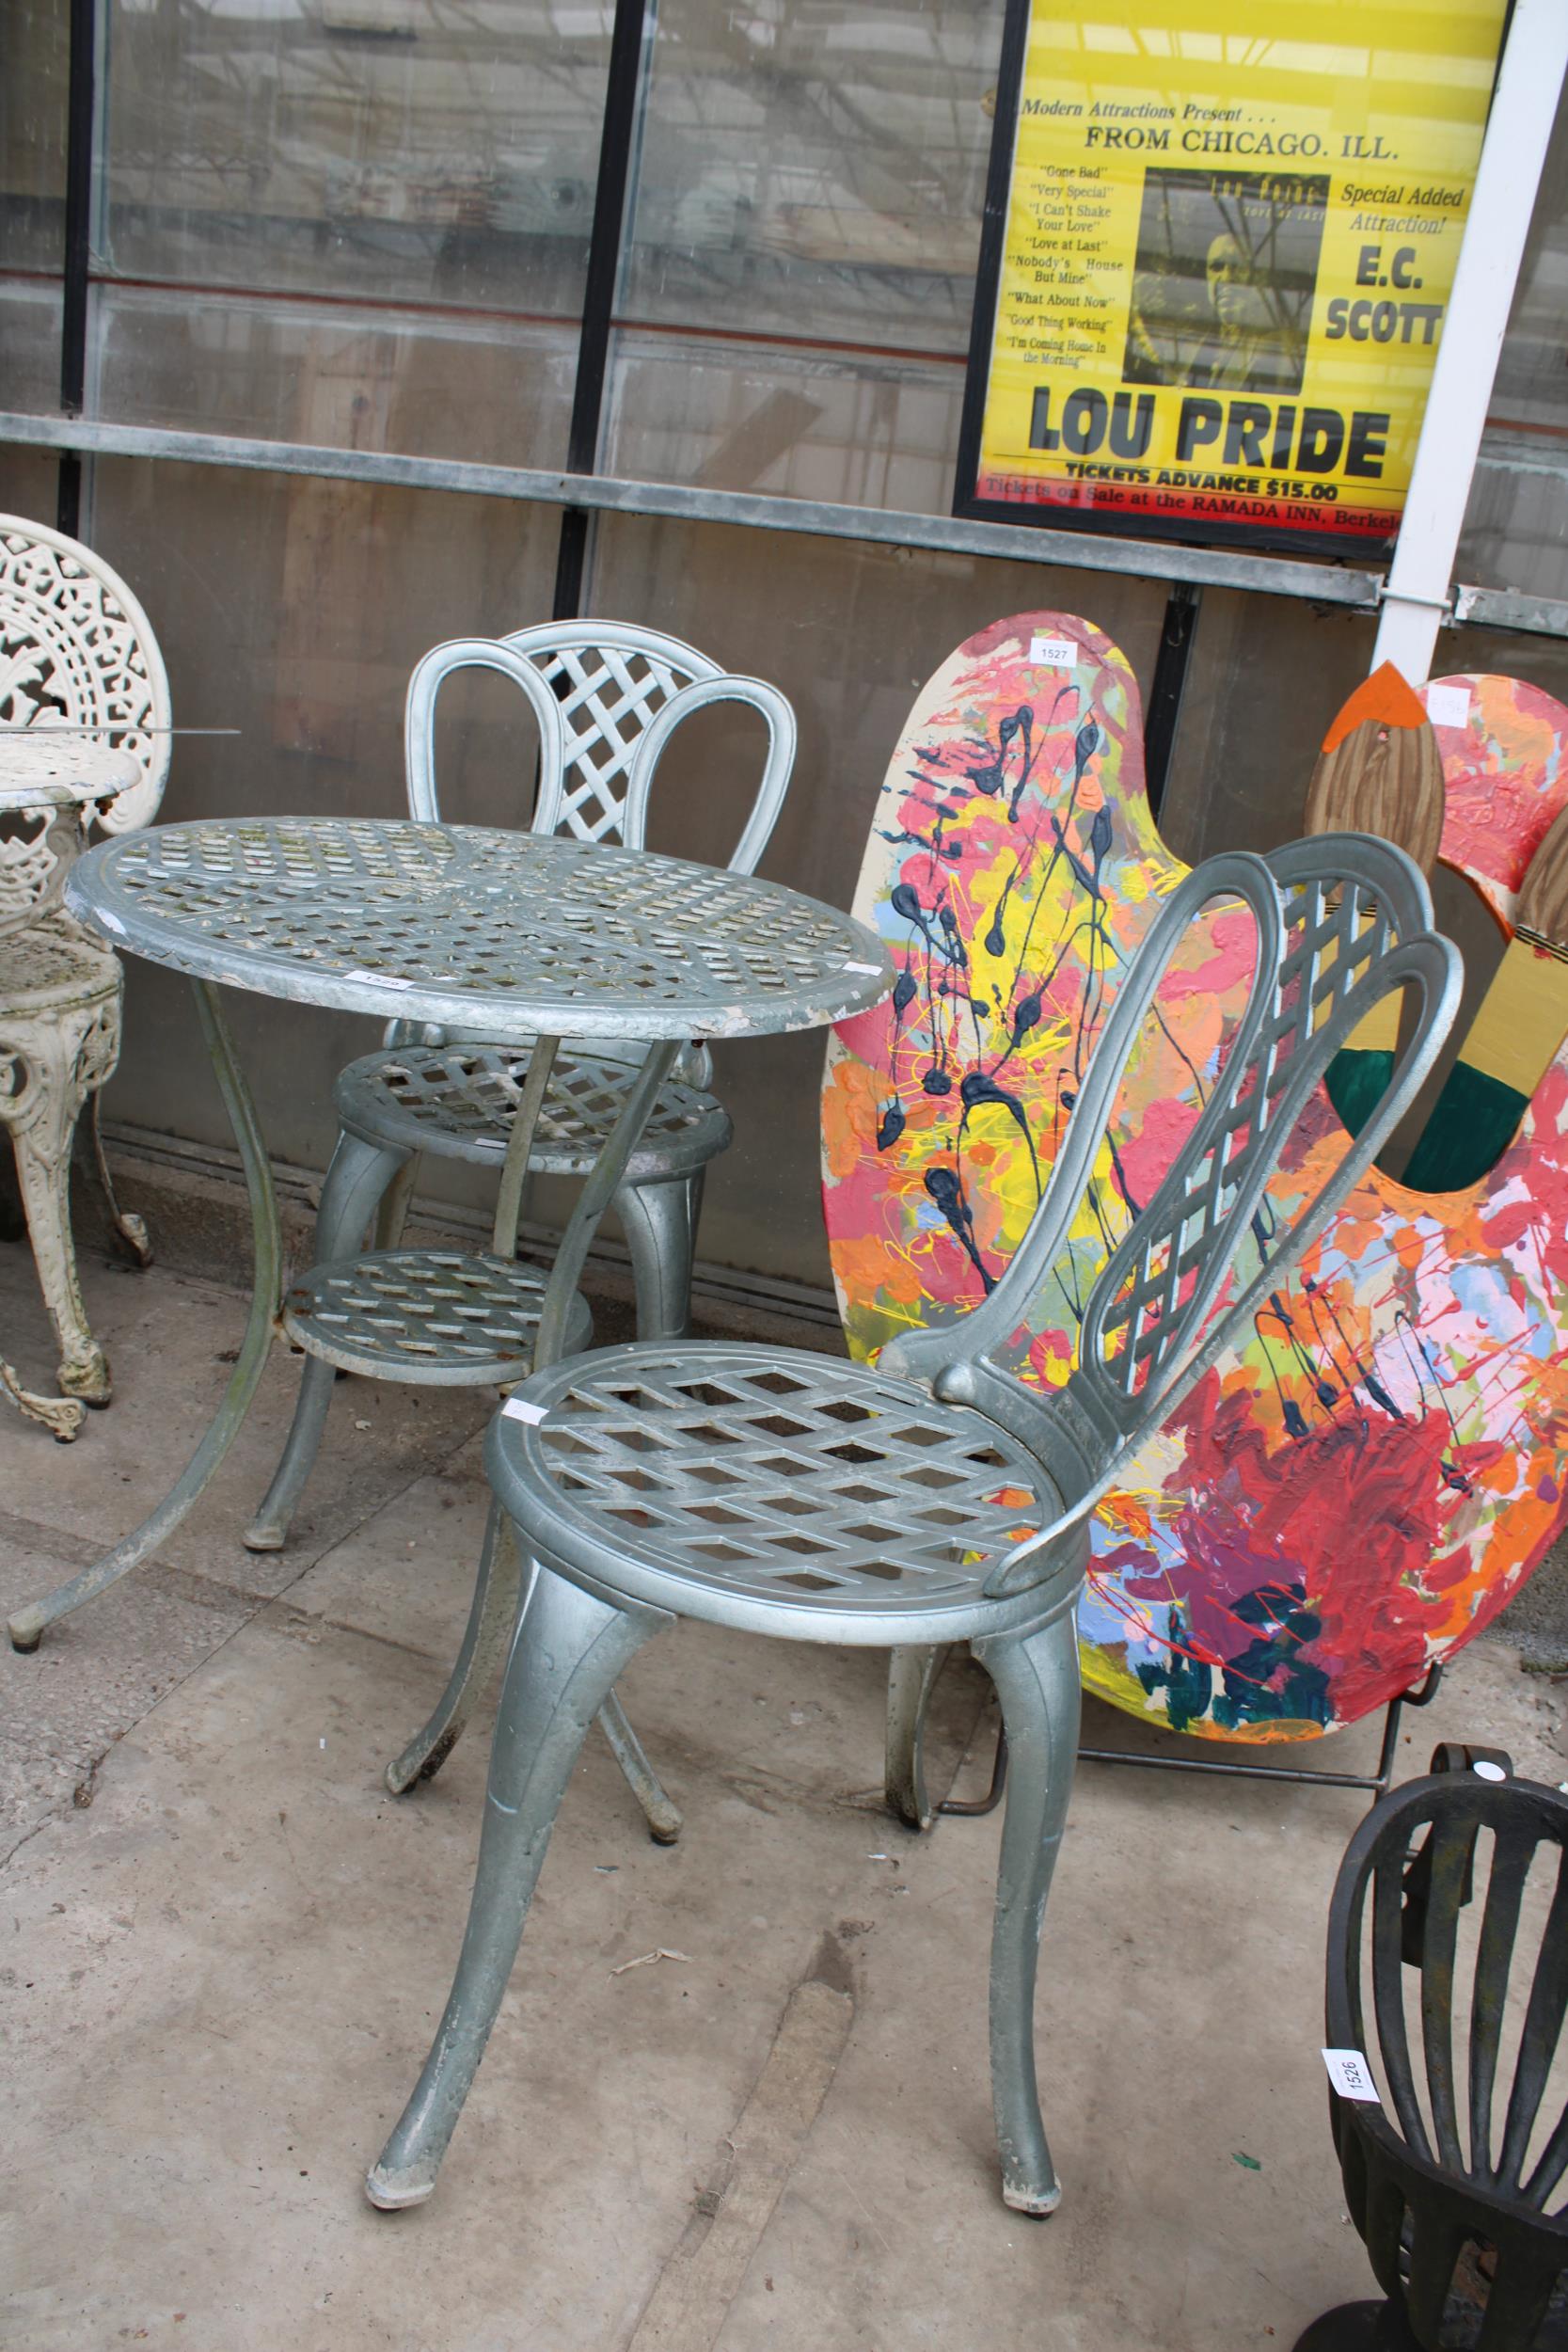 A CAST ALLOY BISTRO SET COMPRISING OF A ROUND TABLE AND TWO CHAIRS - Image 2 of 2